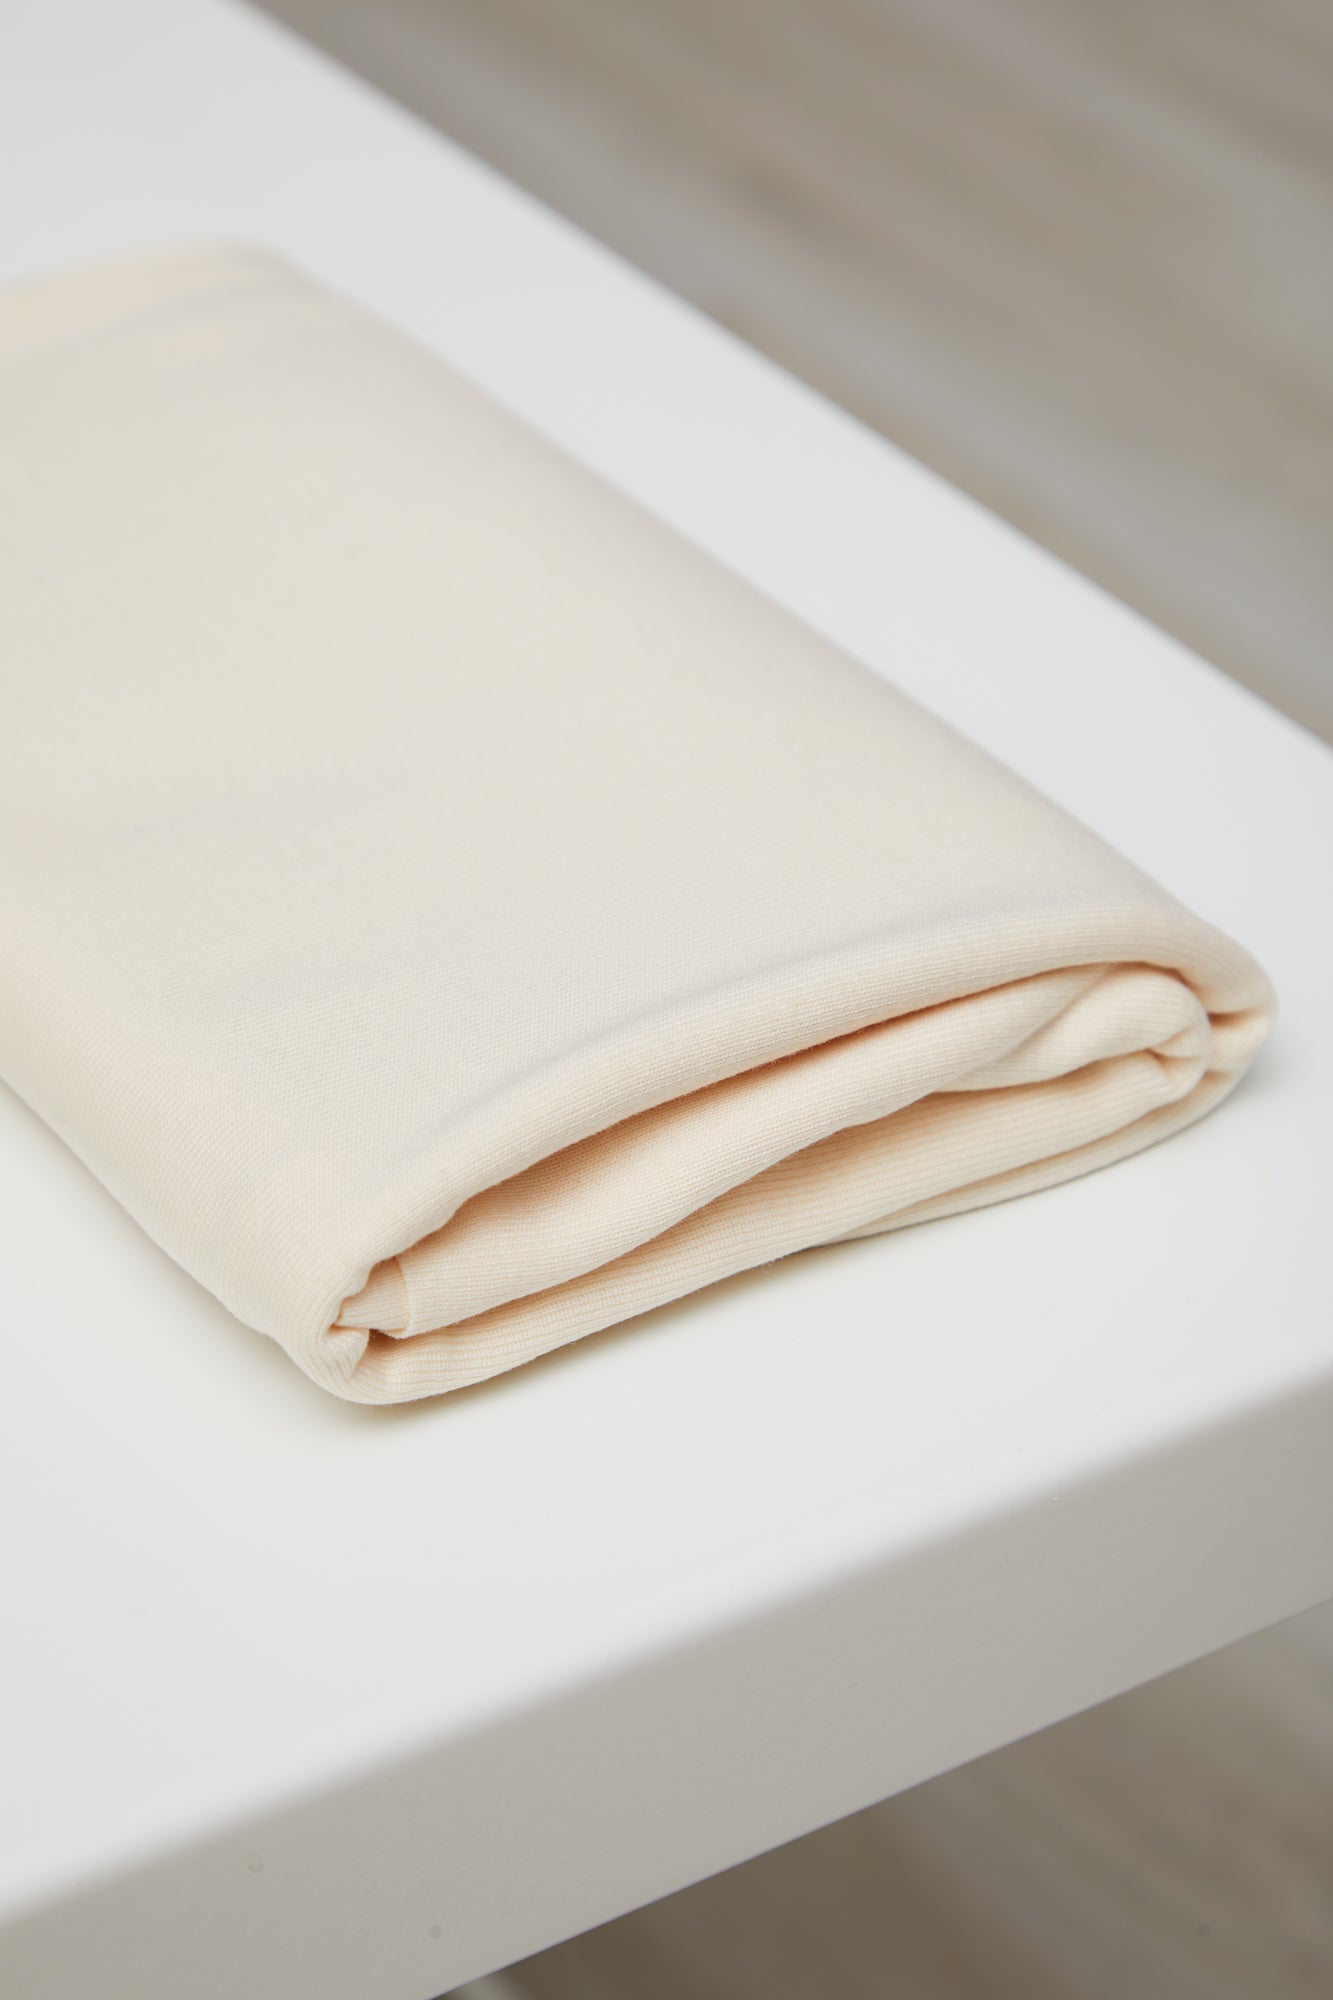 Cream coloured organic cotton and tencel jersey knit sewing fabric folded on top of white table